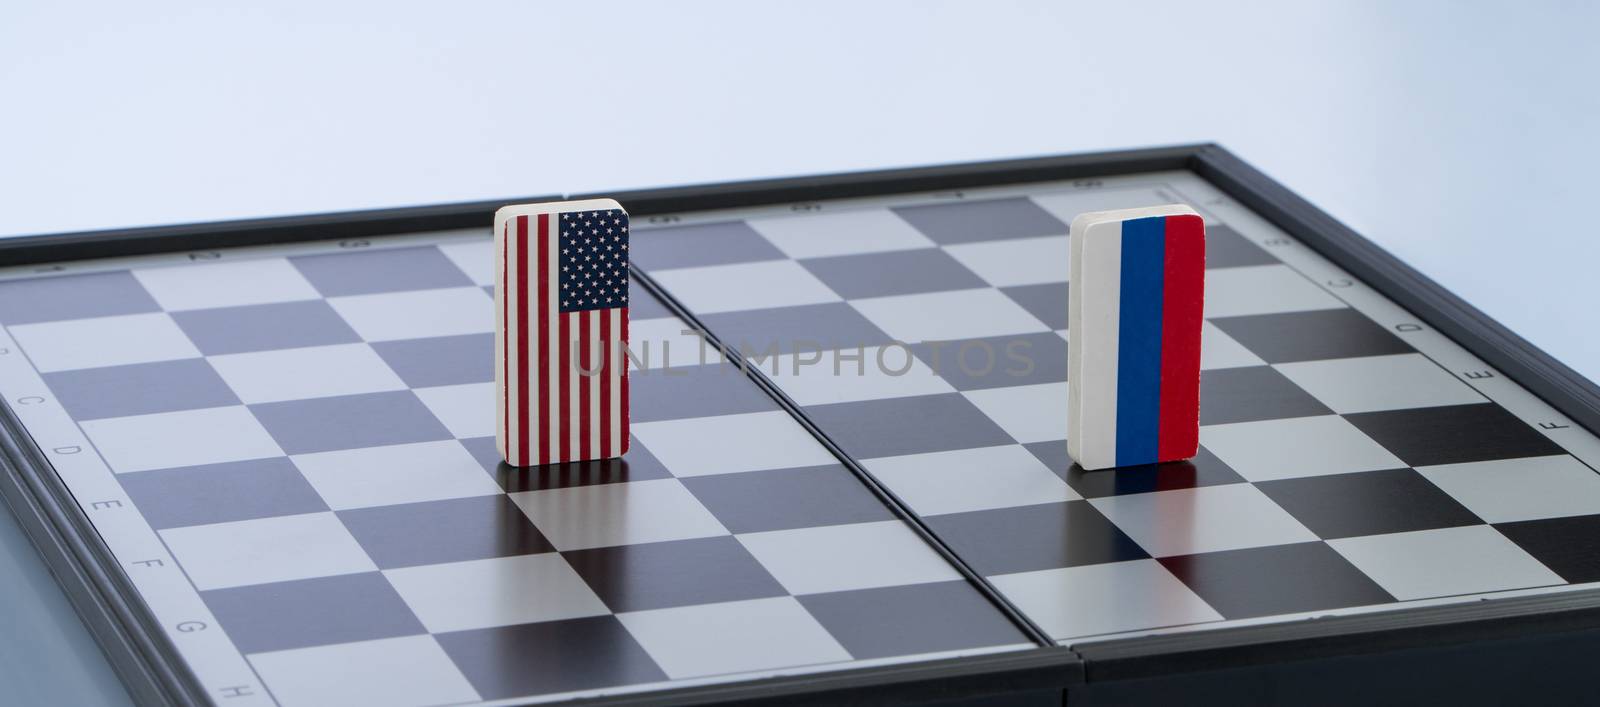 Symbols flag of Russia and the United States on the chessboard. The concept of political game.